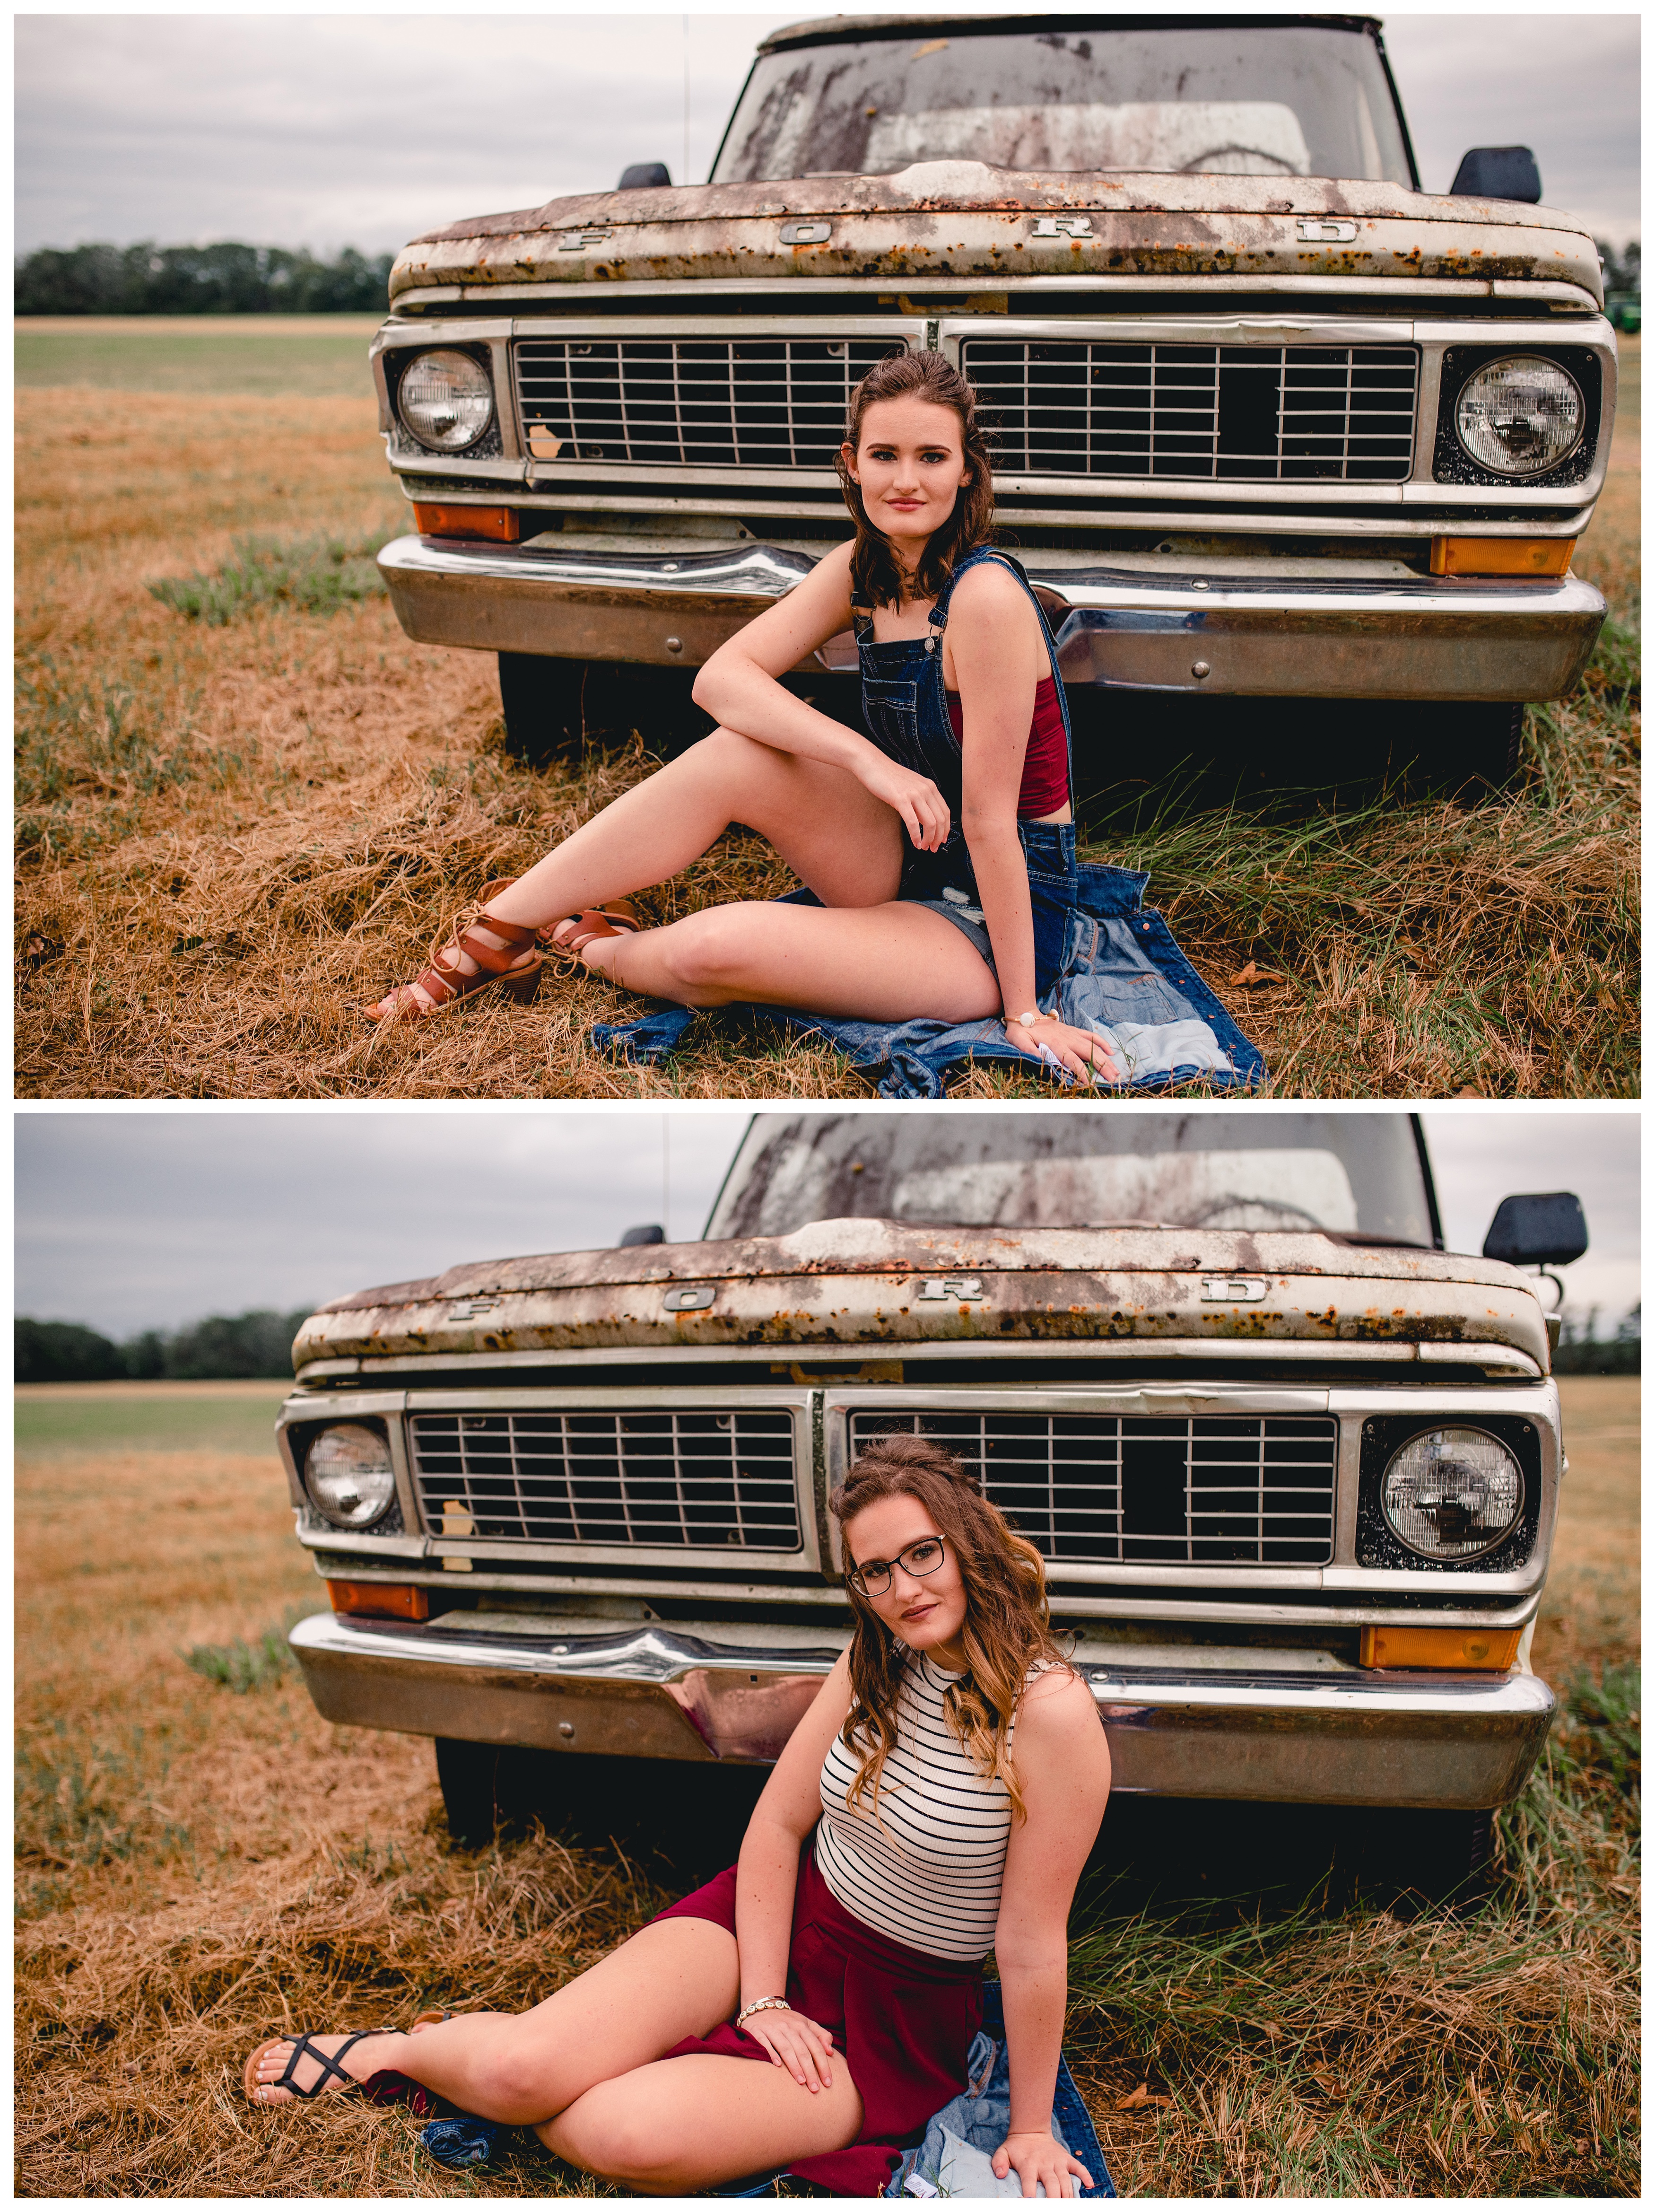 Lifestyle senior portrait photographer located in Tallahassee Florida takes photos of twin senior girls. Shelly Williams Photography